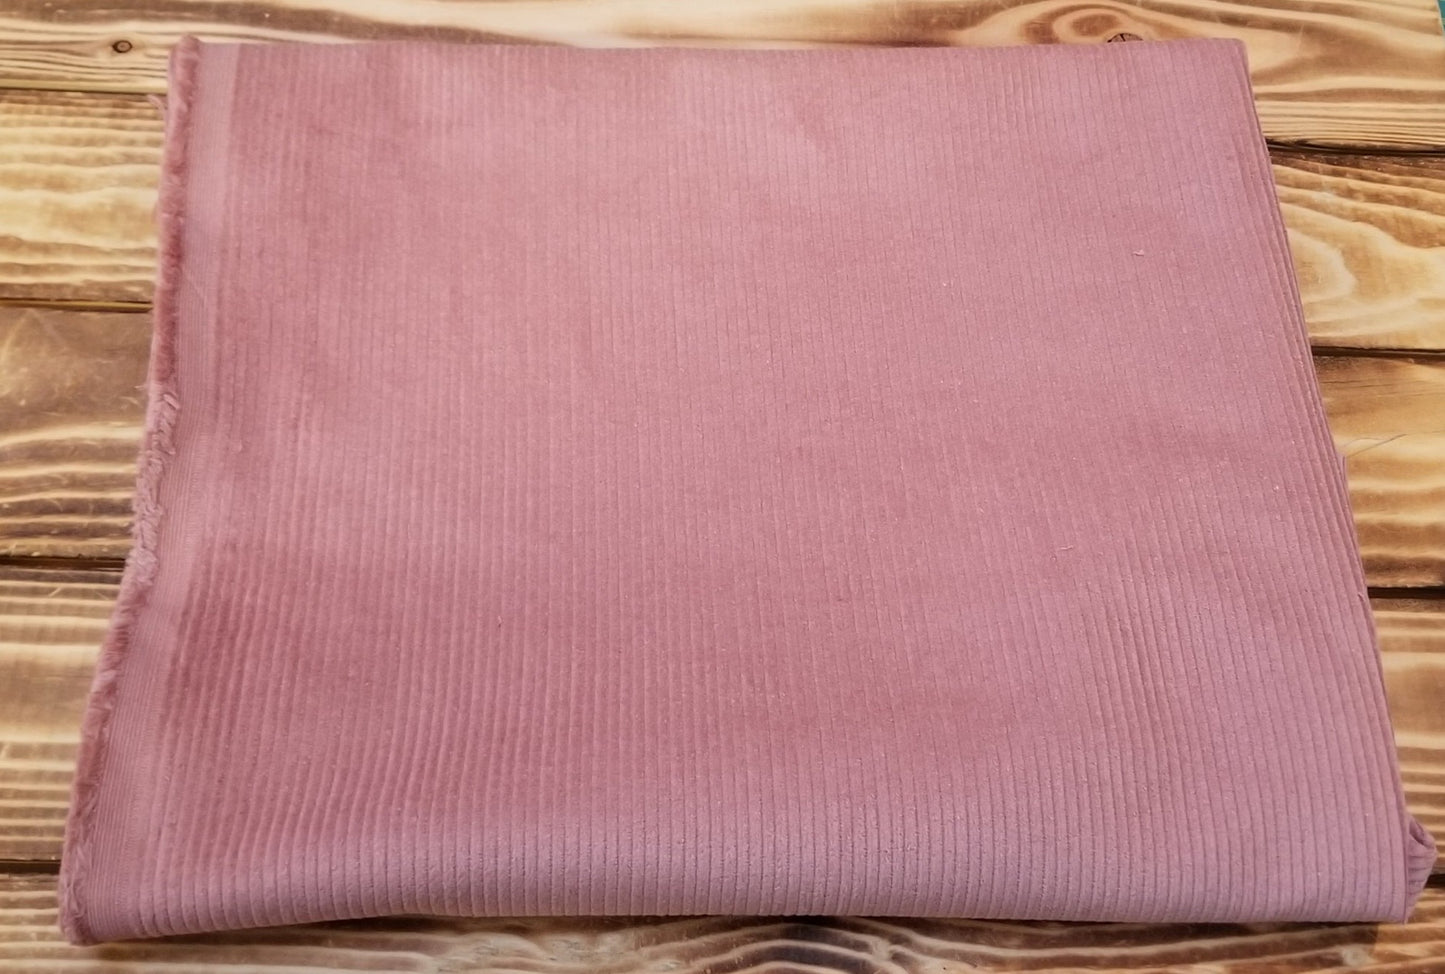 Designer Deadstock 100% Cotton Dusty Pink Rose Corduroy Medium Wale Woven- by the yard